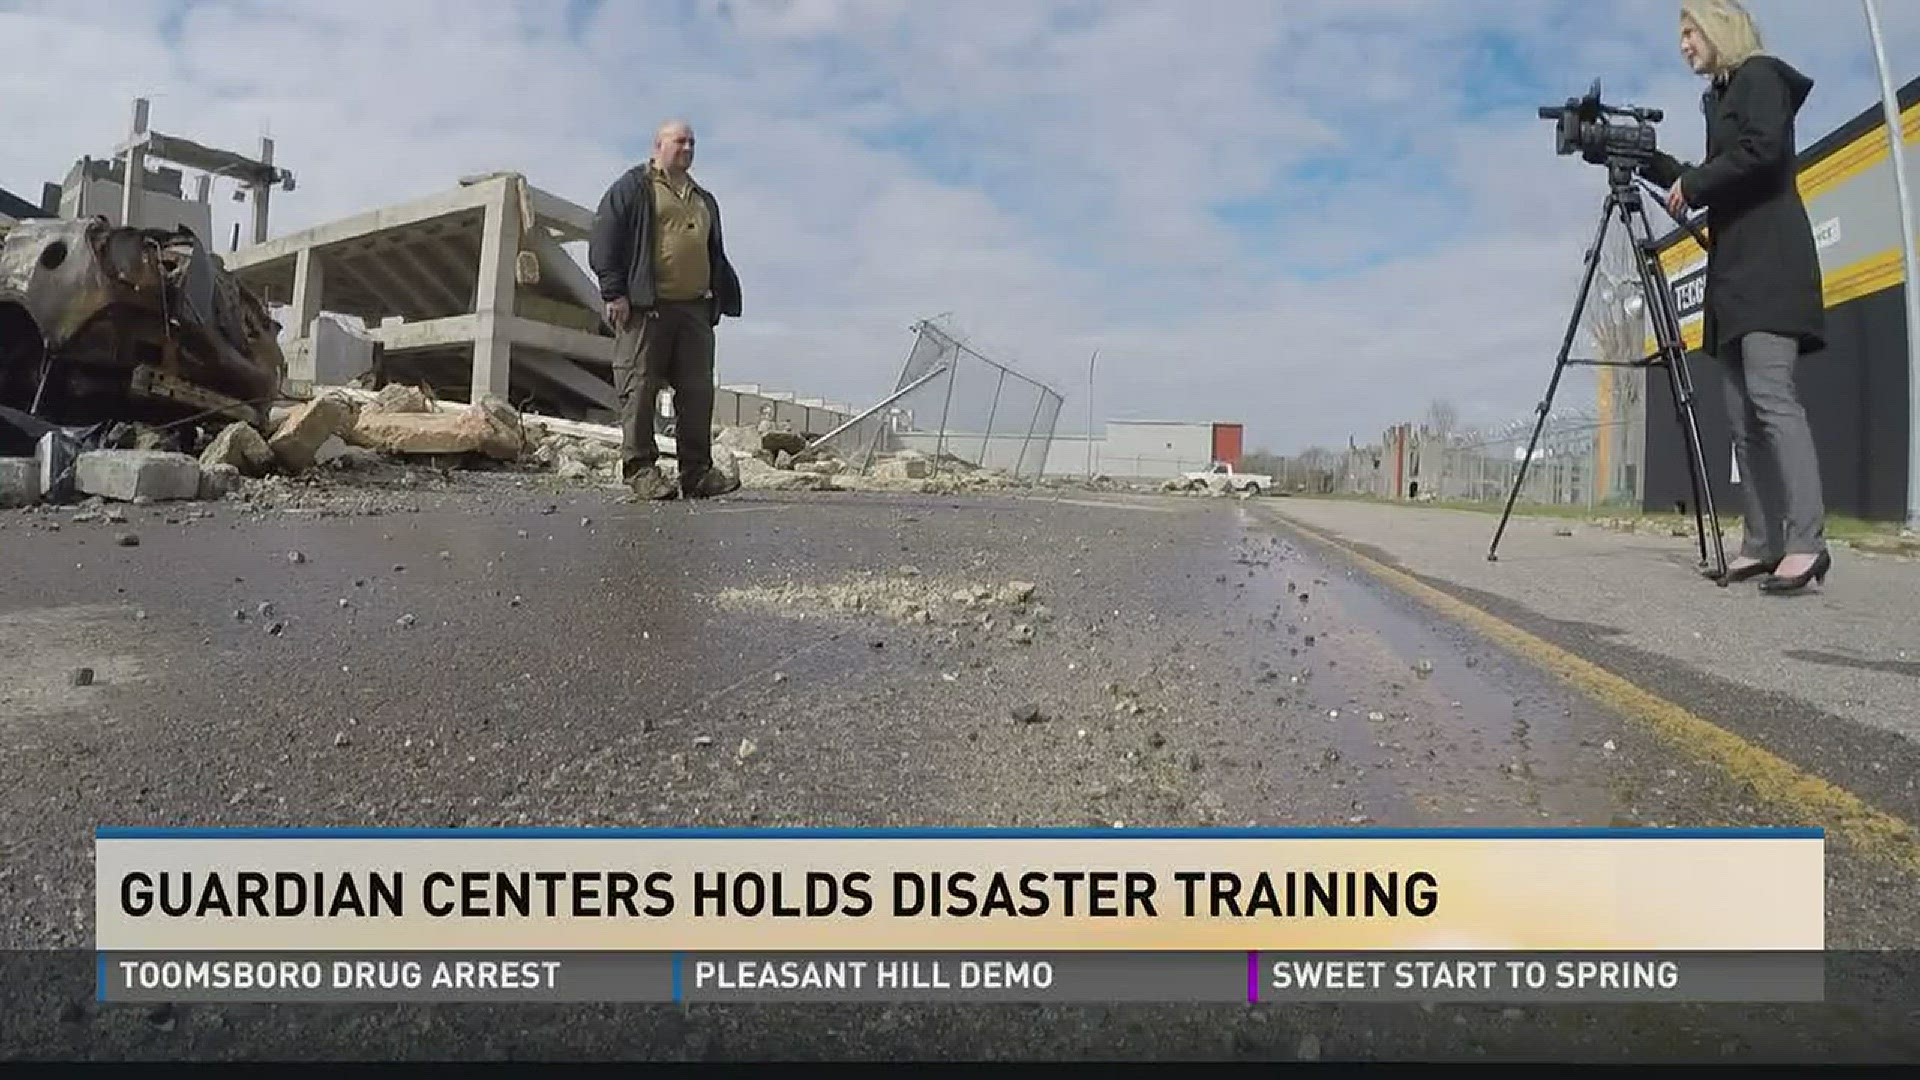 Guardian Centers holds disaster training